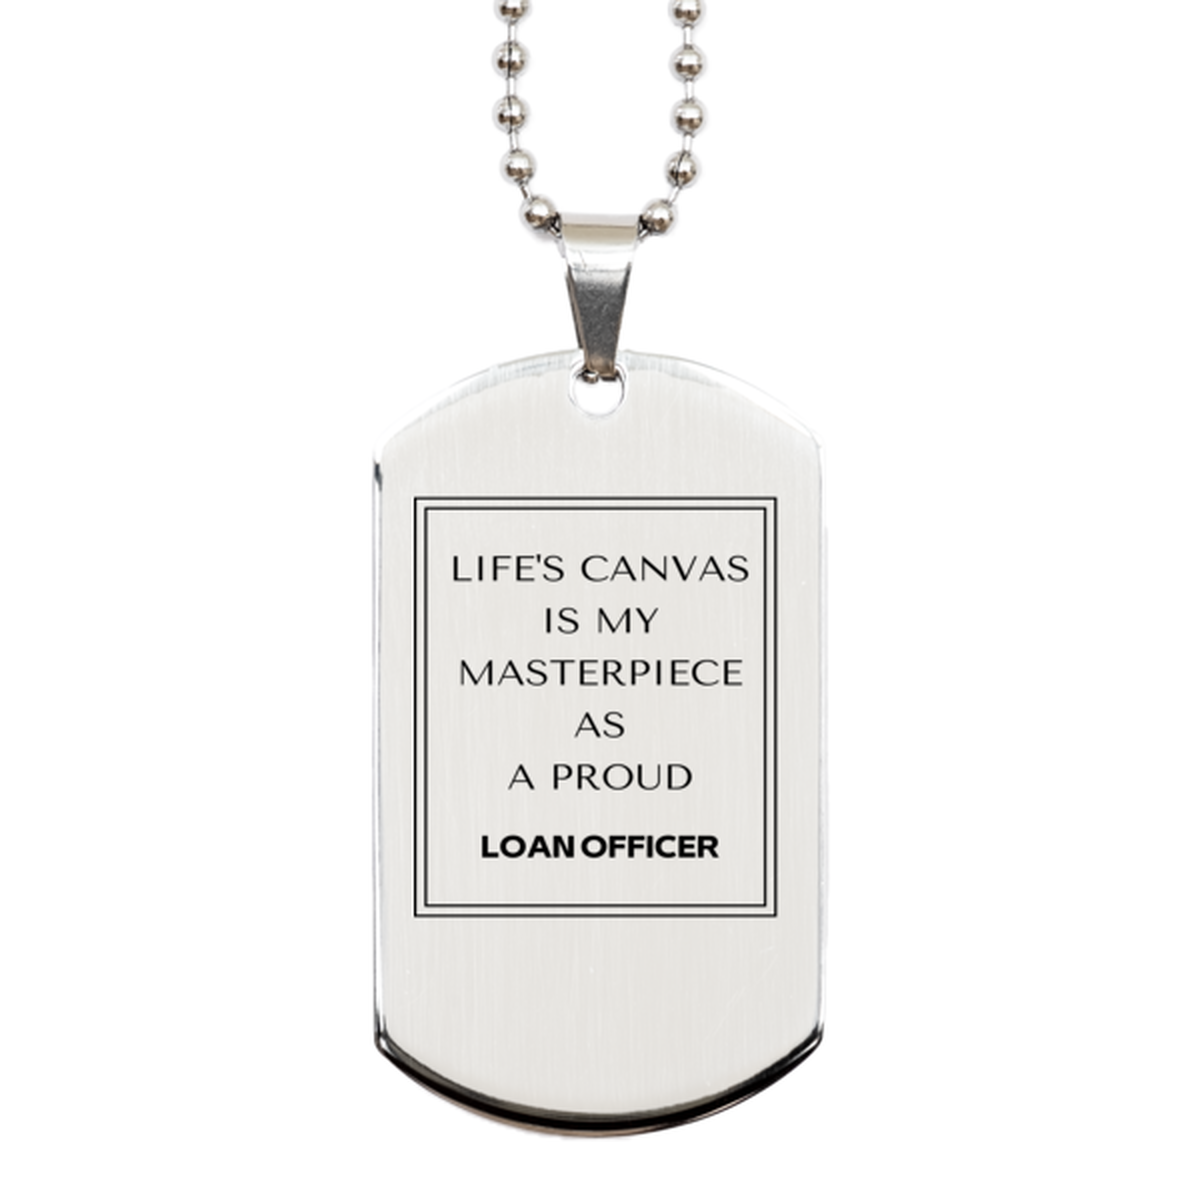 Proud Loan Officer Gifts, Life's canvas is my masterpiece, Epic Birthday Christmas Unique Silver Dog Tag For Loan Officer, Coworkers, Men, Women, Friends